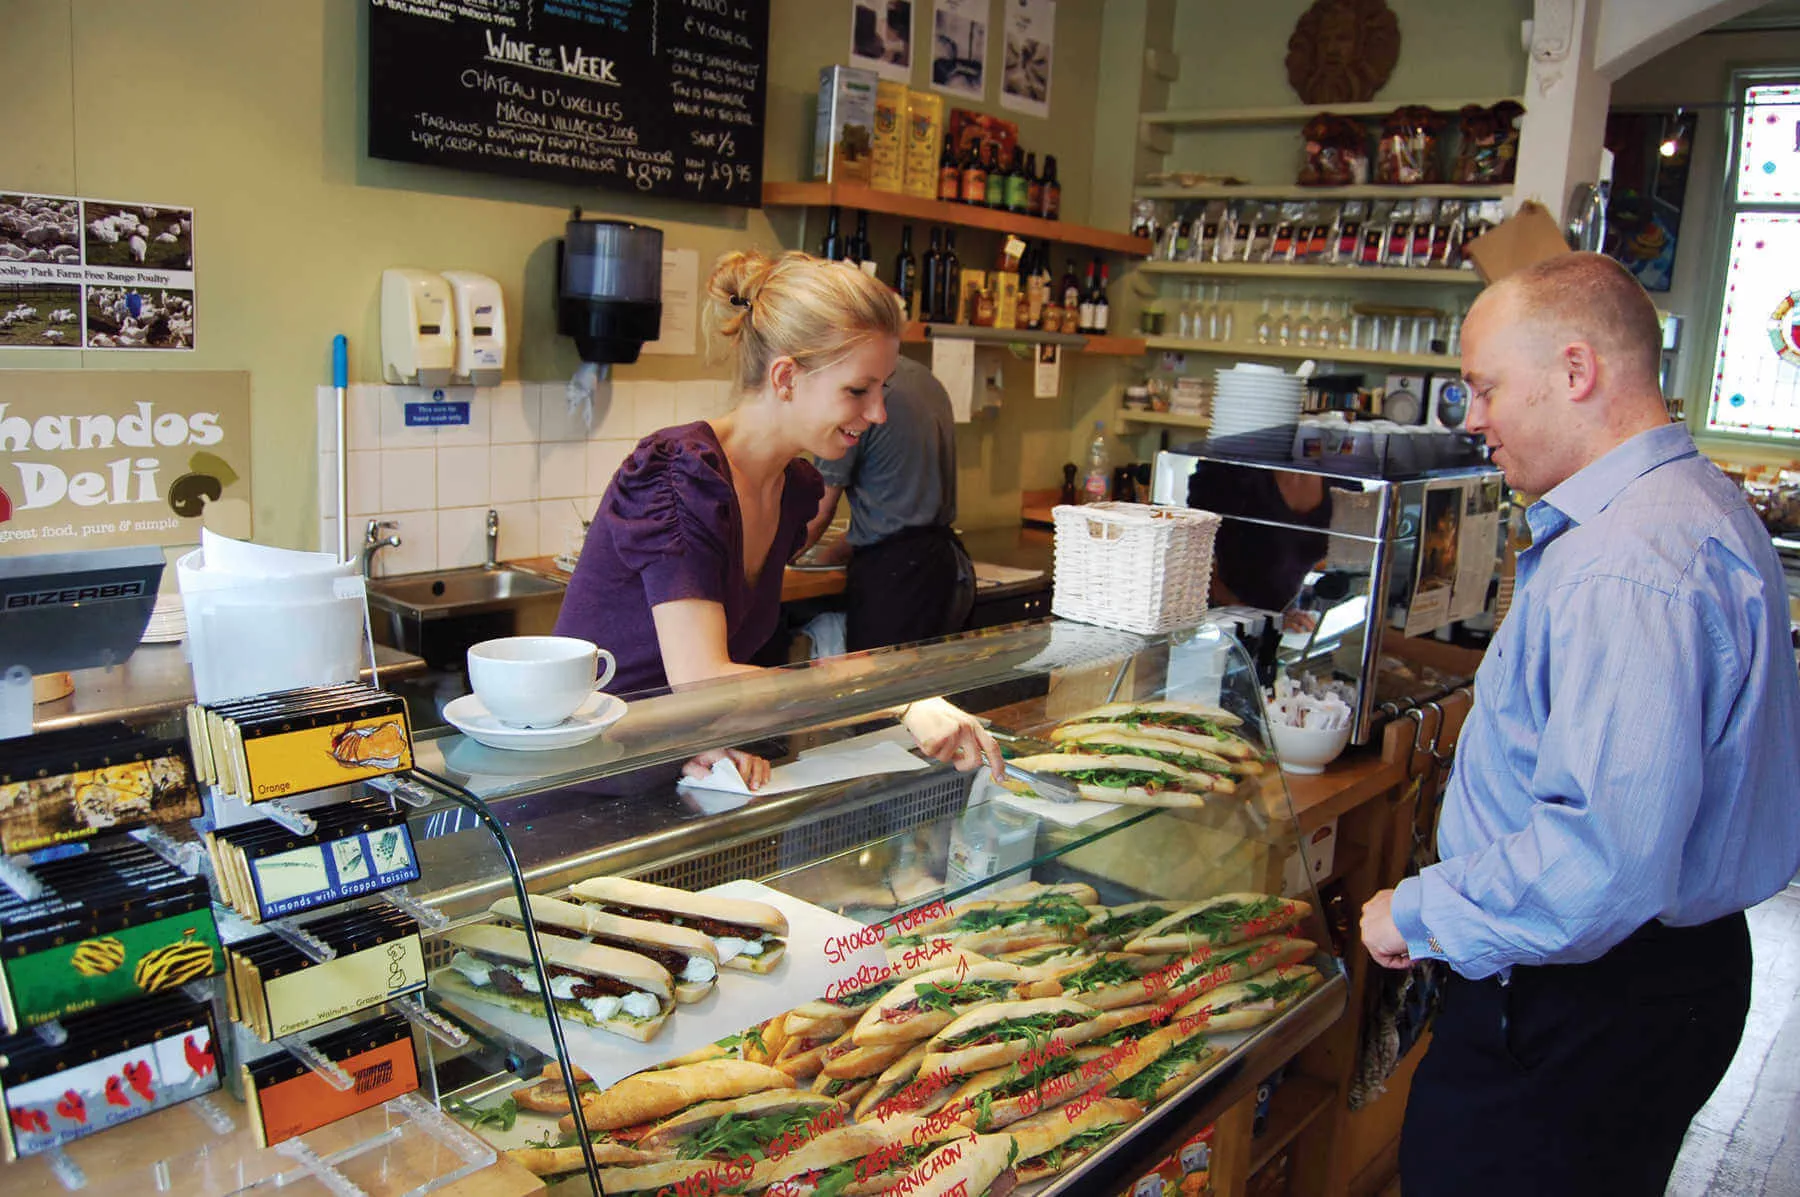 English office workers and savvy tourists get tasty sandwiches at delis